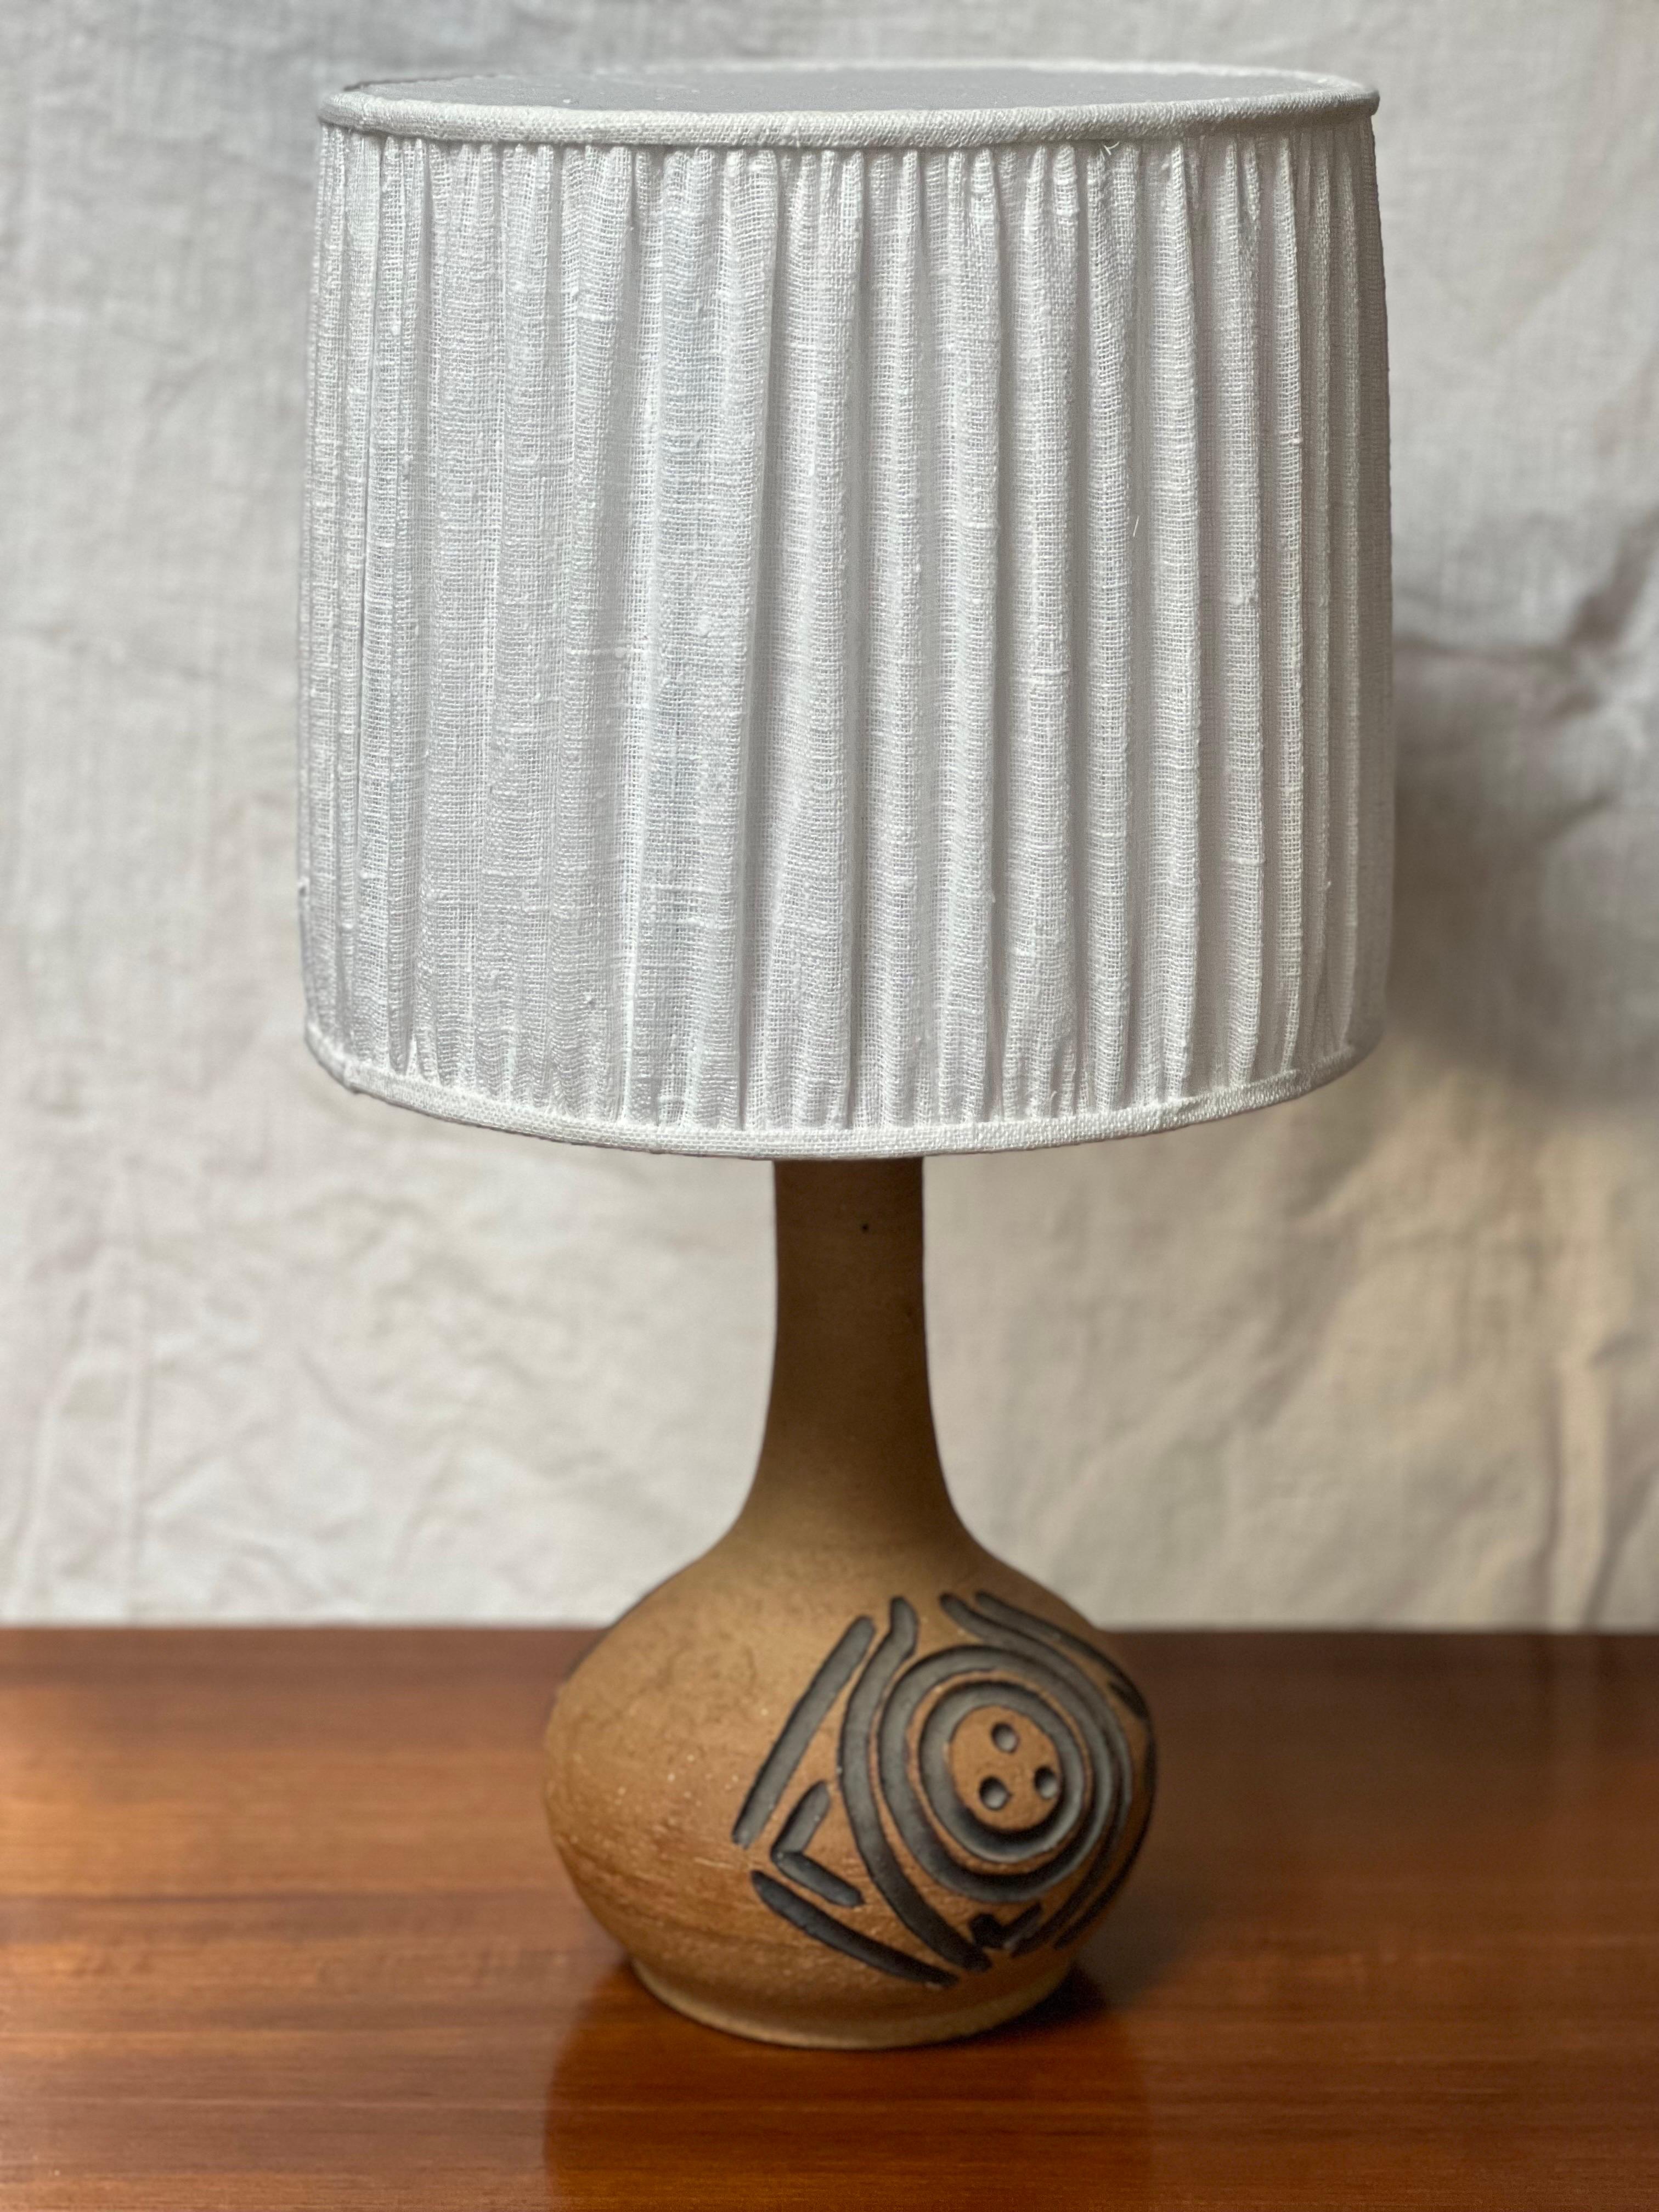 Lamp made in the 1970's at the Axella studio design which was a ceramic manufacturing company. Earth tones with a strong blackened pattern. The total height of this lamp including the shade is 57 cm. The shade is H 27 cm and the diameter 30 cm. The